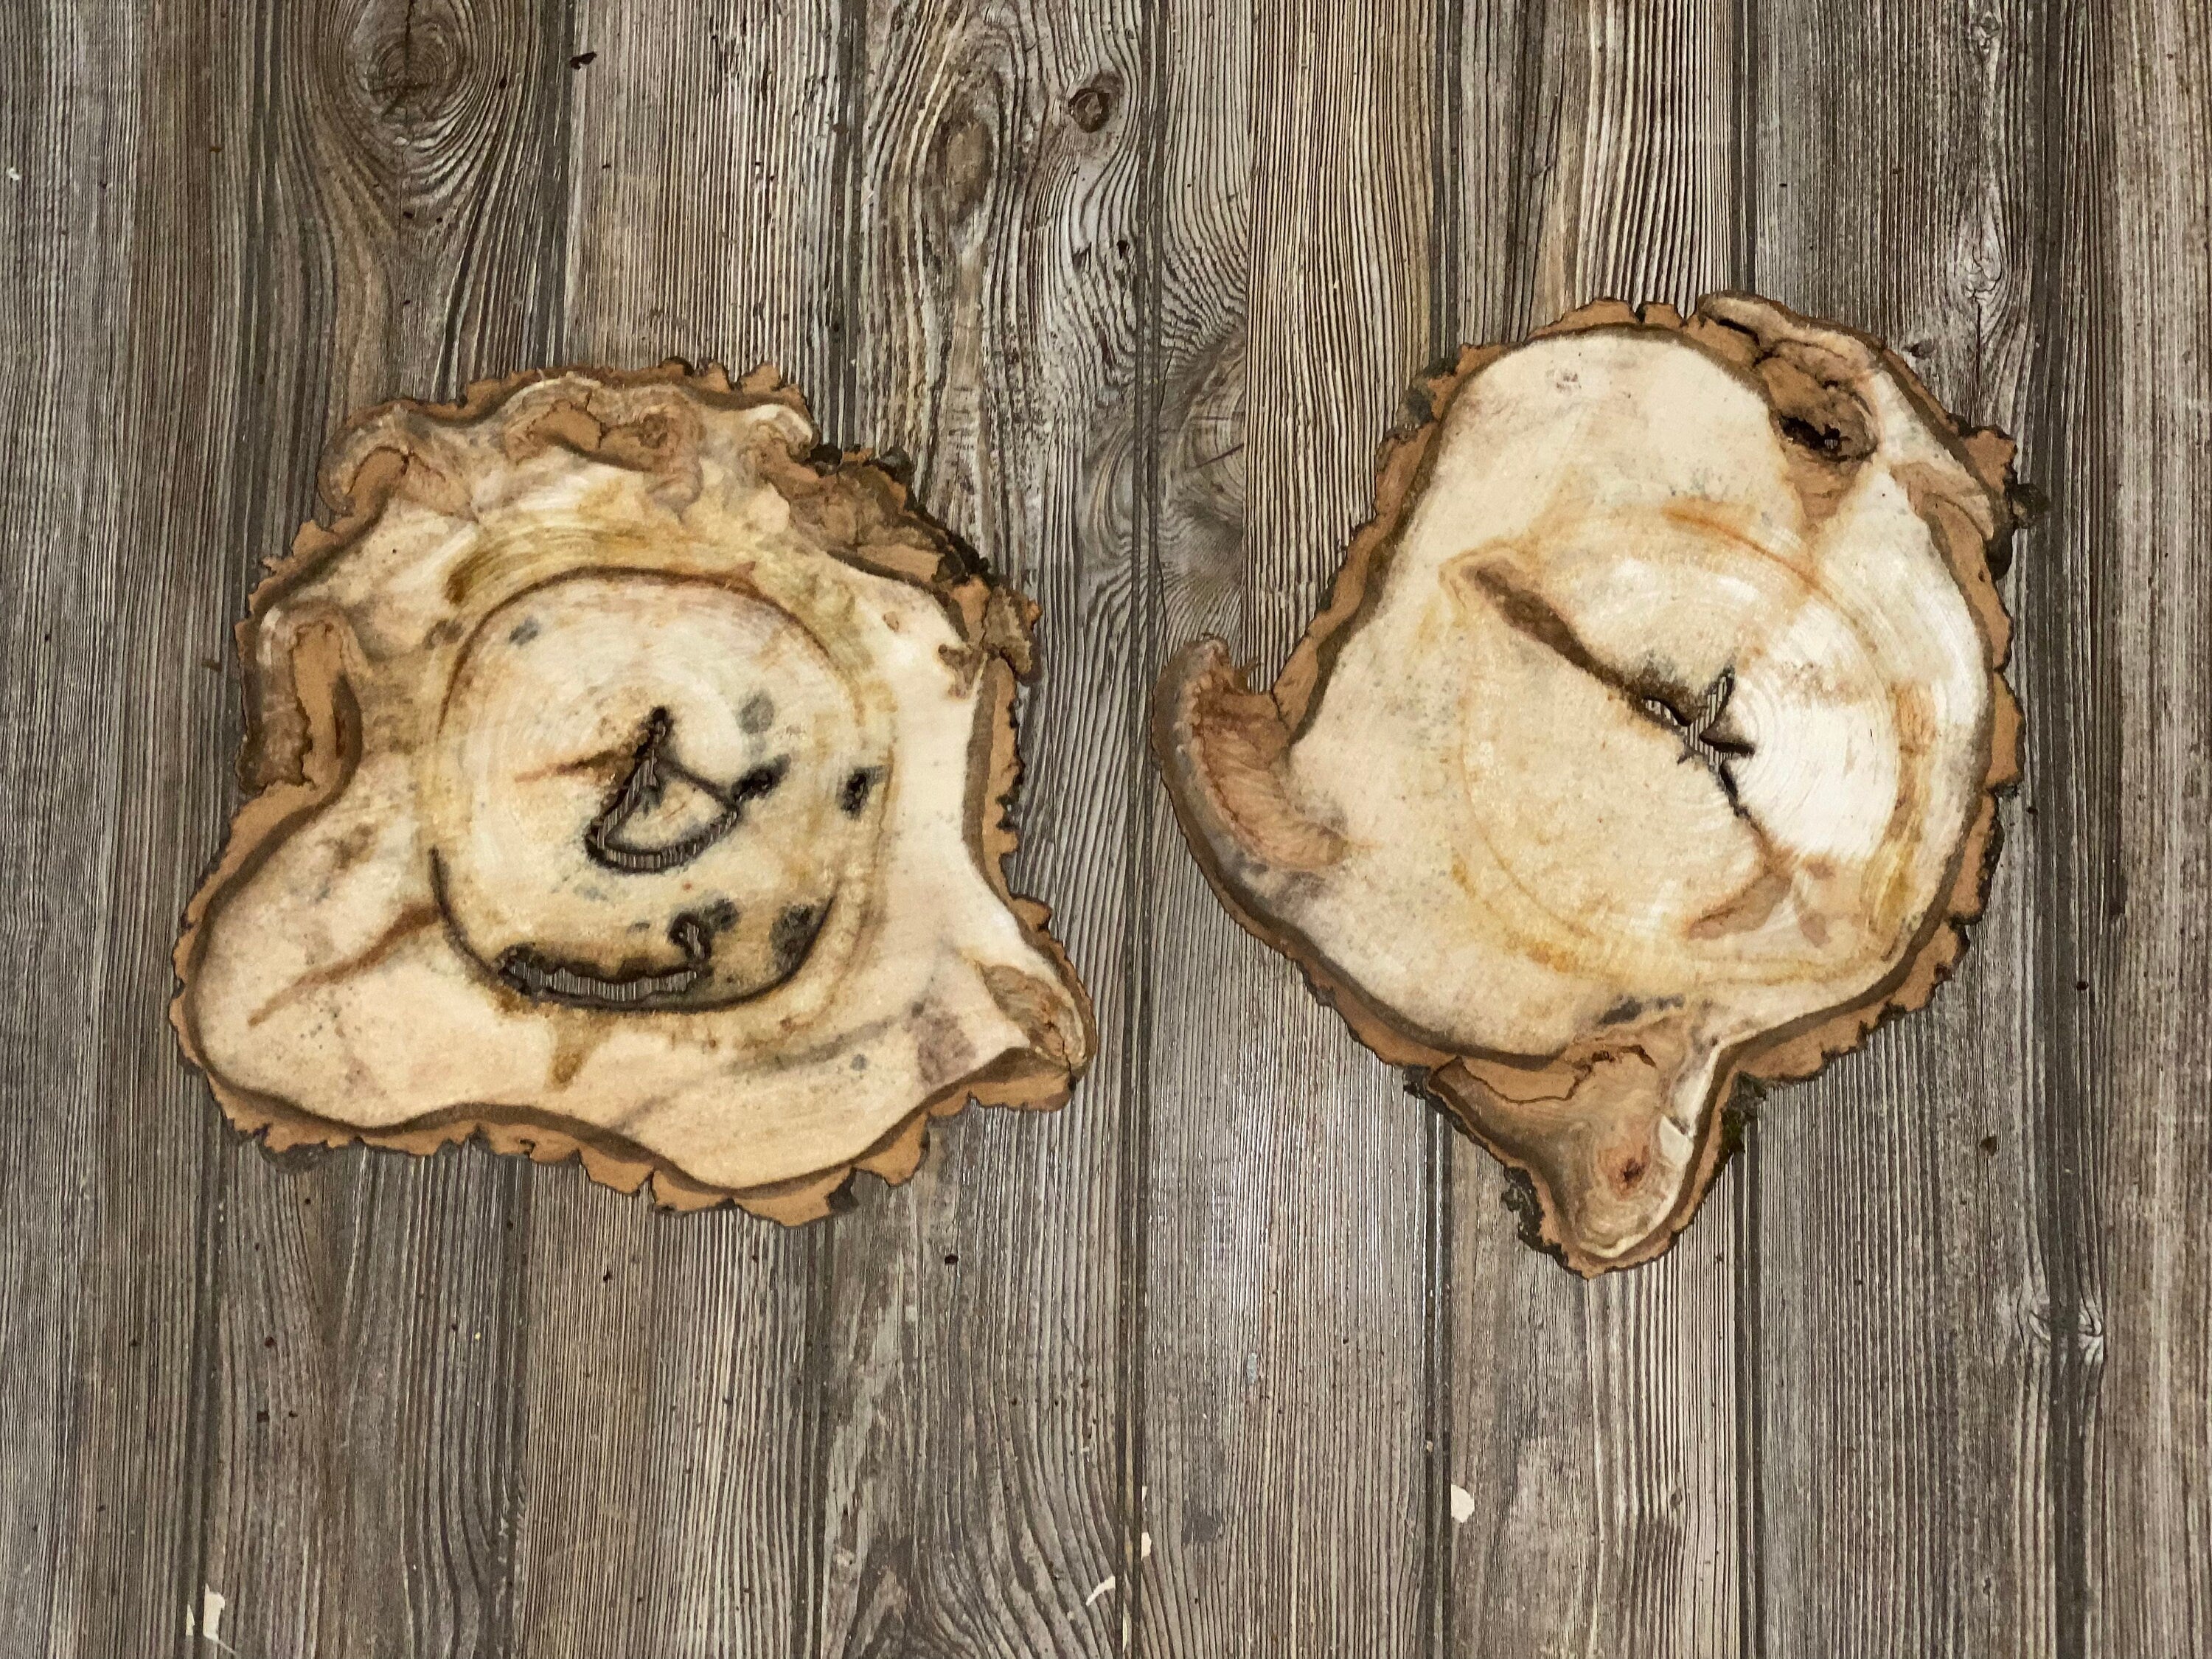 Two Aspen Burl Slices, Approximately 12.5 Inches Long by 11 Inches Wide and 3/4 Inches Thick